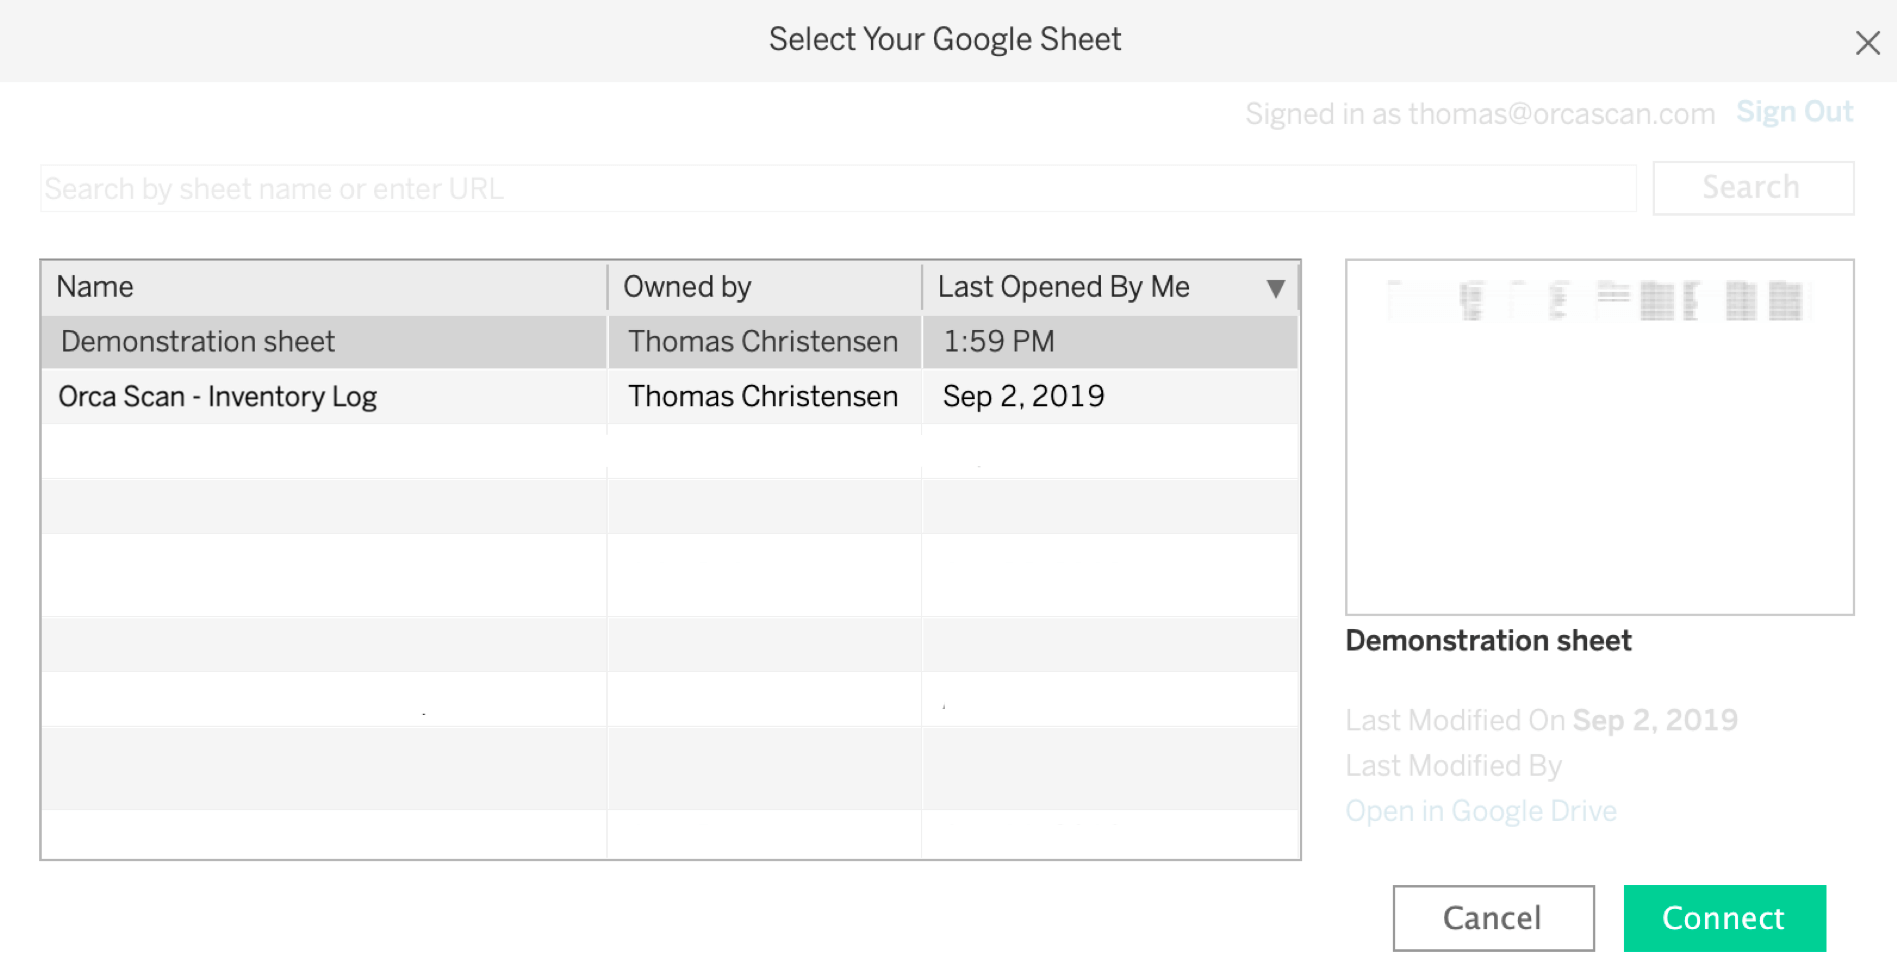 Choose the Google Sheet with your Orca Scan data in it and click 'Connect'. 